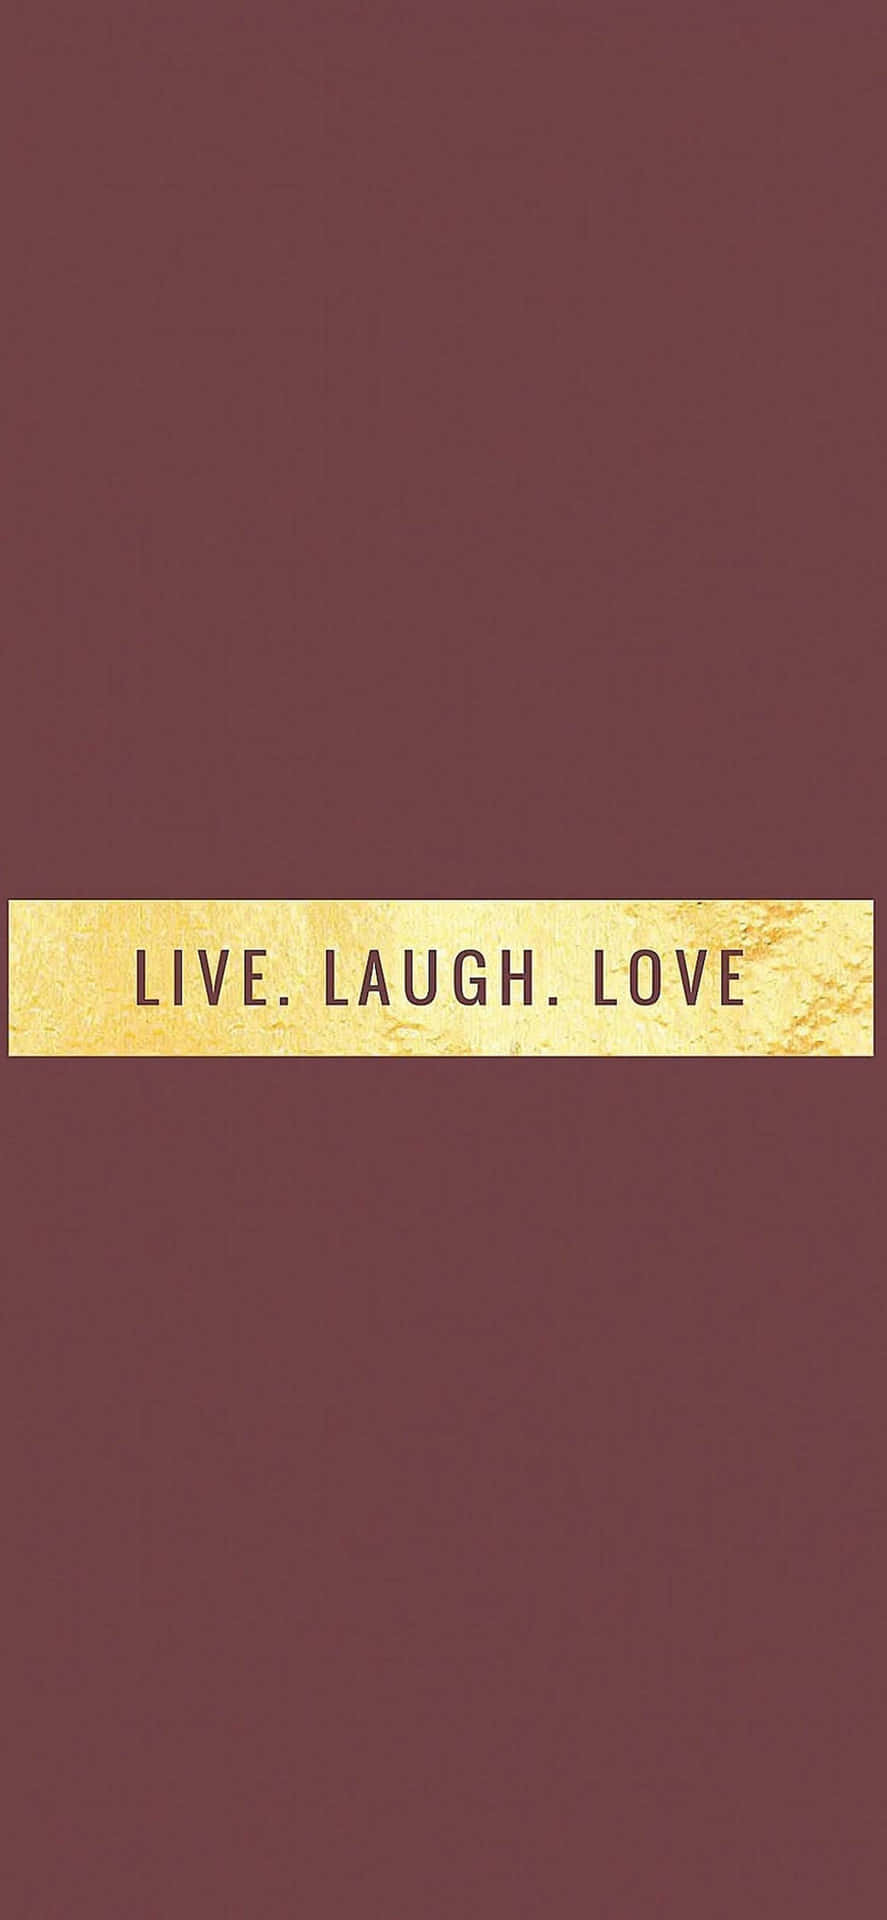 Enjoy life, share laughs and find true love. Wallpaper